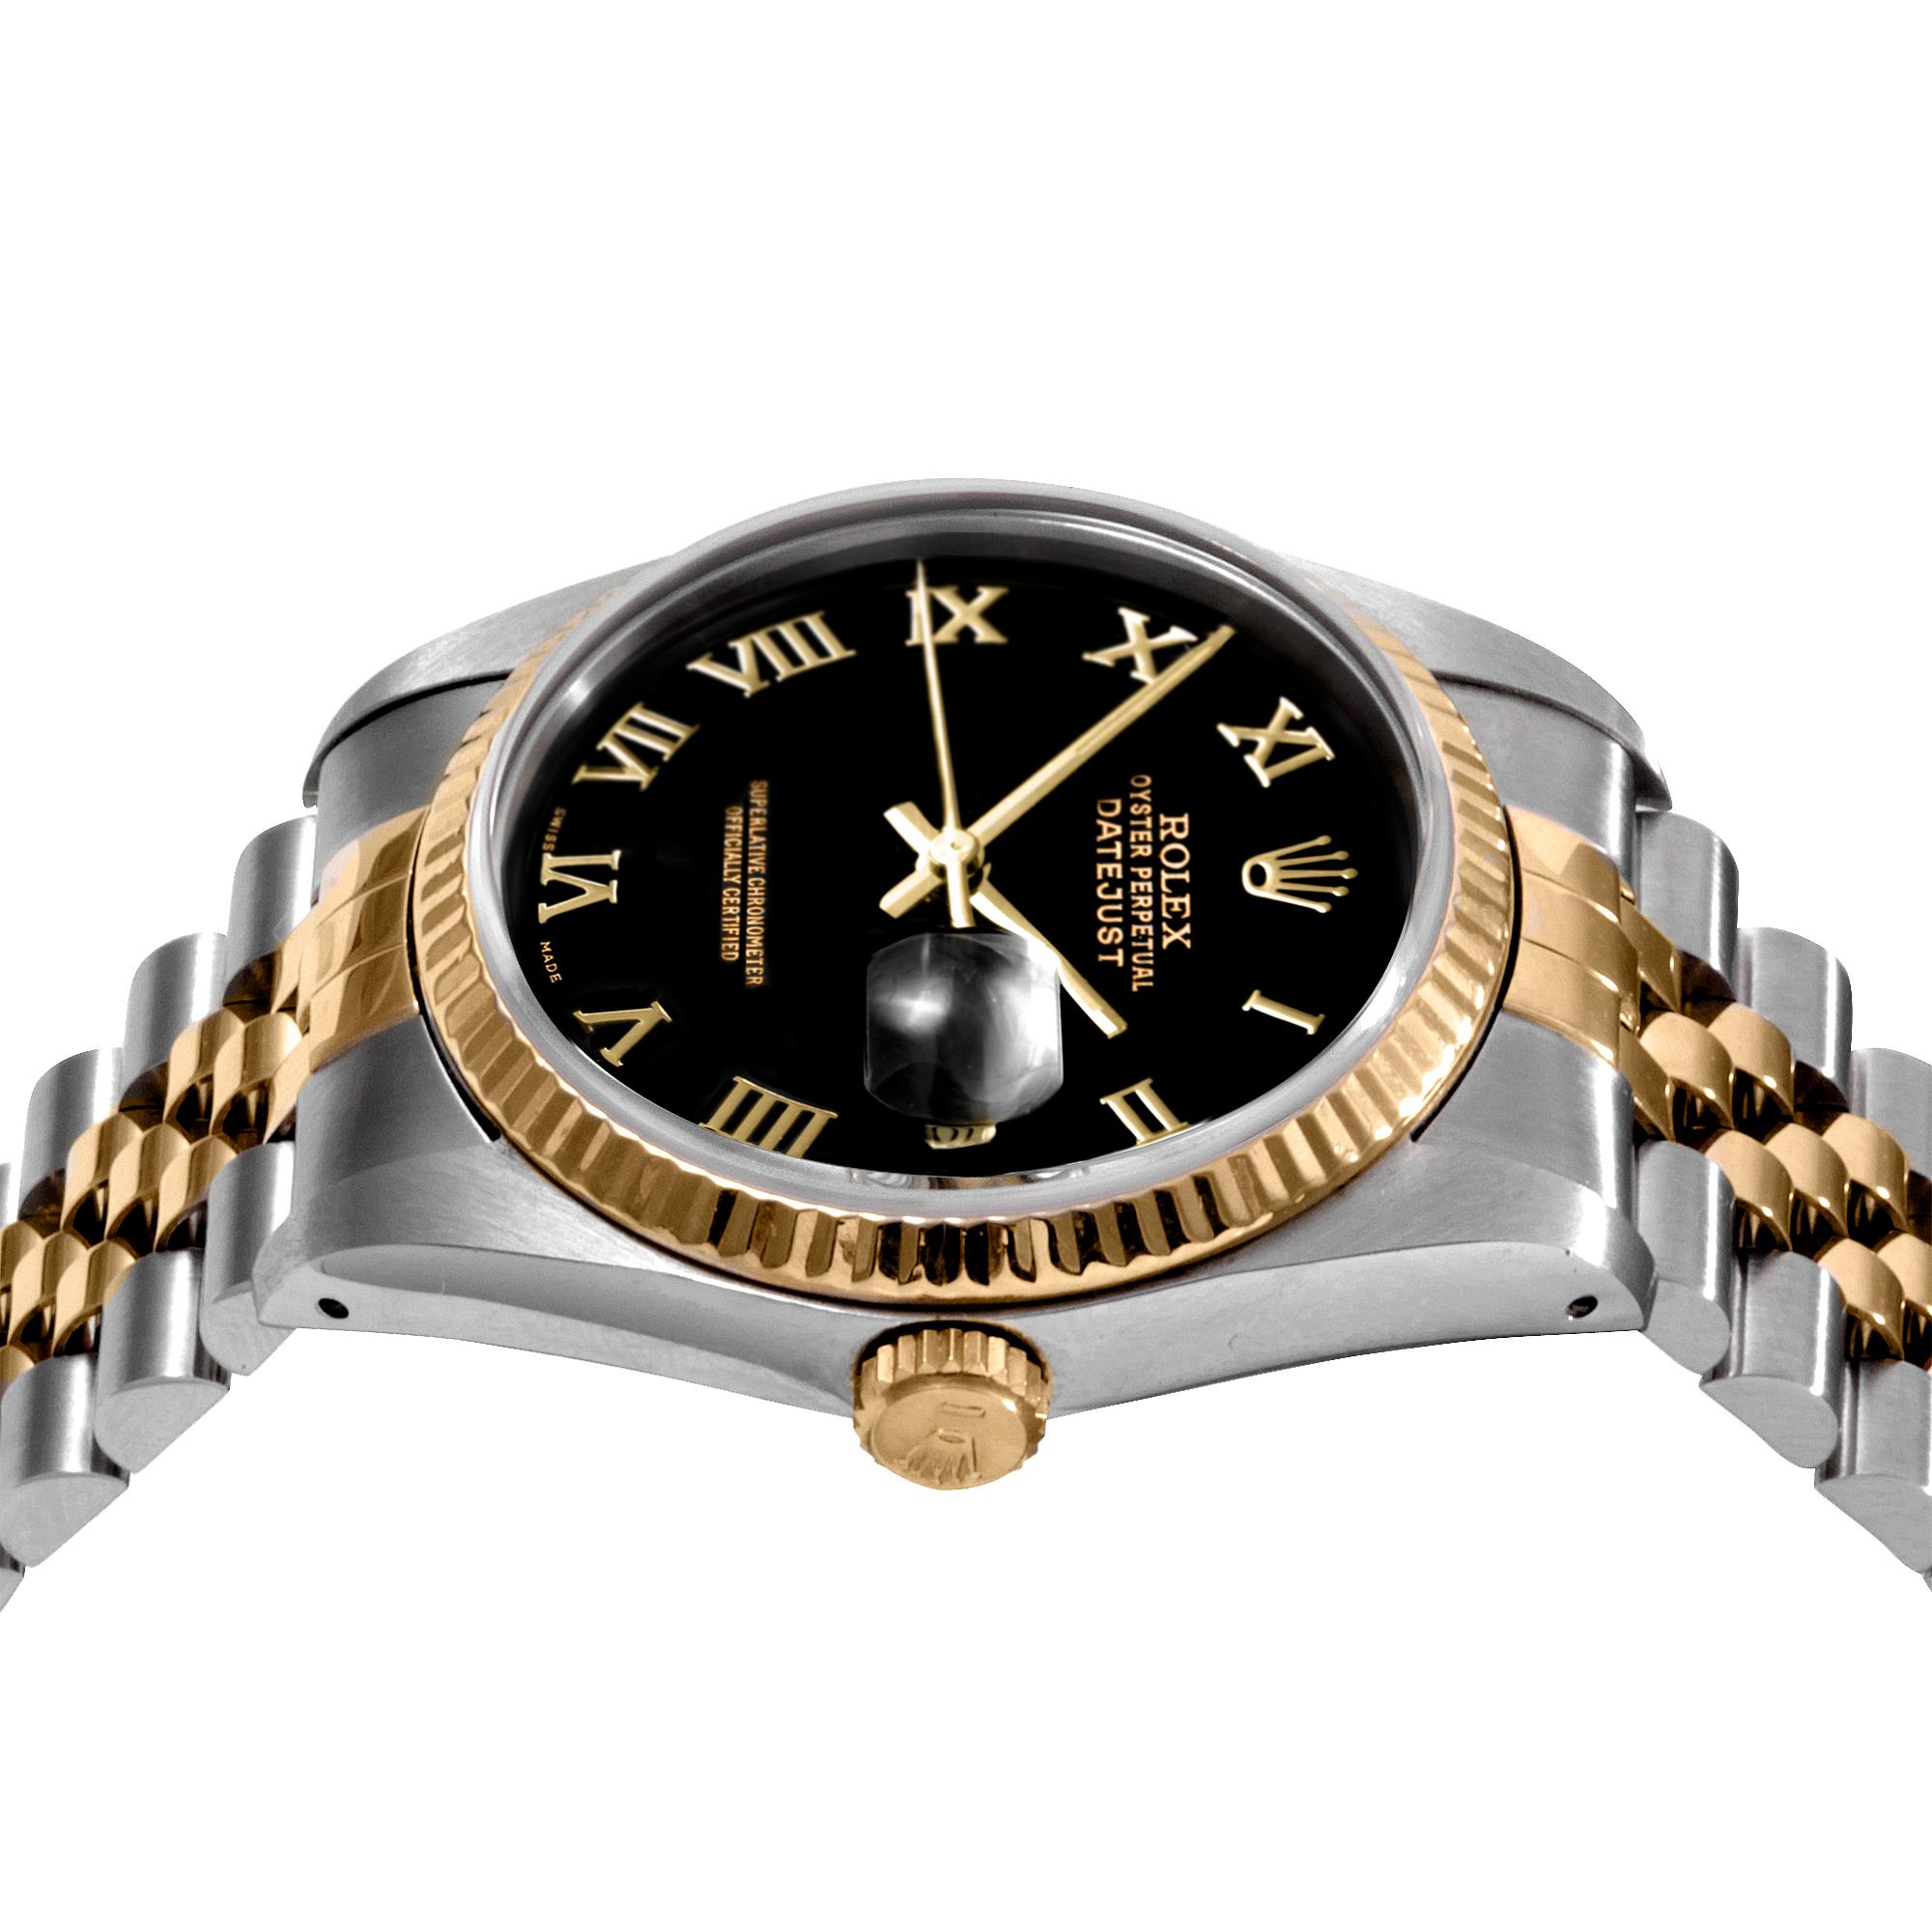 (Watch Description) 
Brand - Rolex
Gender - Unisex
Model - 16013 Datejust 
Metals -yellow gold / steel 
Case size - 36mm
Bezel - Yellow gold Fluted
Crystal - acrylic
Movement - Automatic Cal.3055
Dial - Black roman 
Wrist band - Rolex Jubilee two